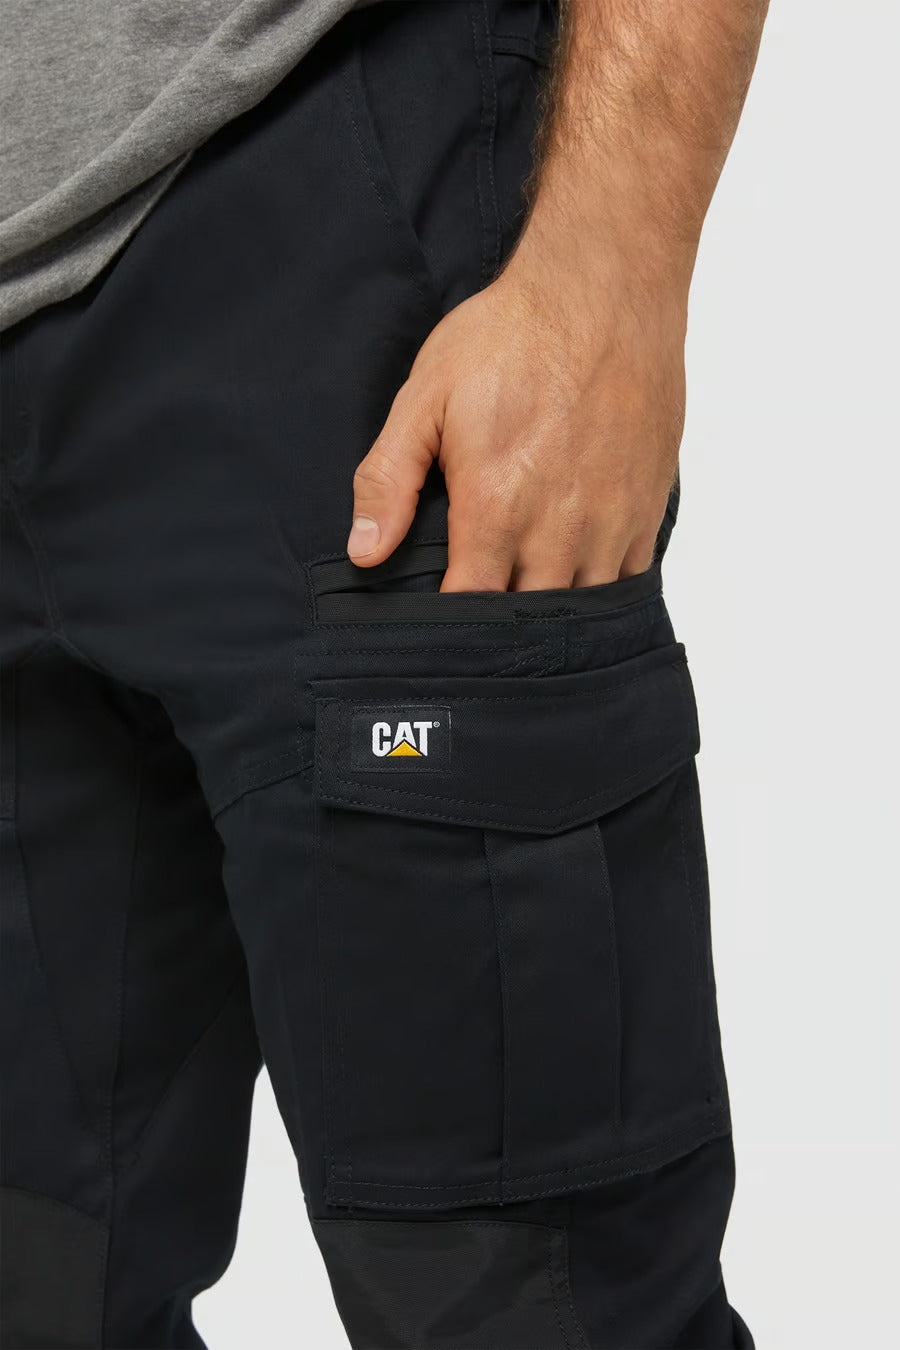 CAT COOLMAX Work Pant | Urban Outfitters Japan - Clothing, Music, Home &  Accessories